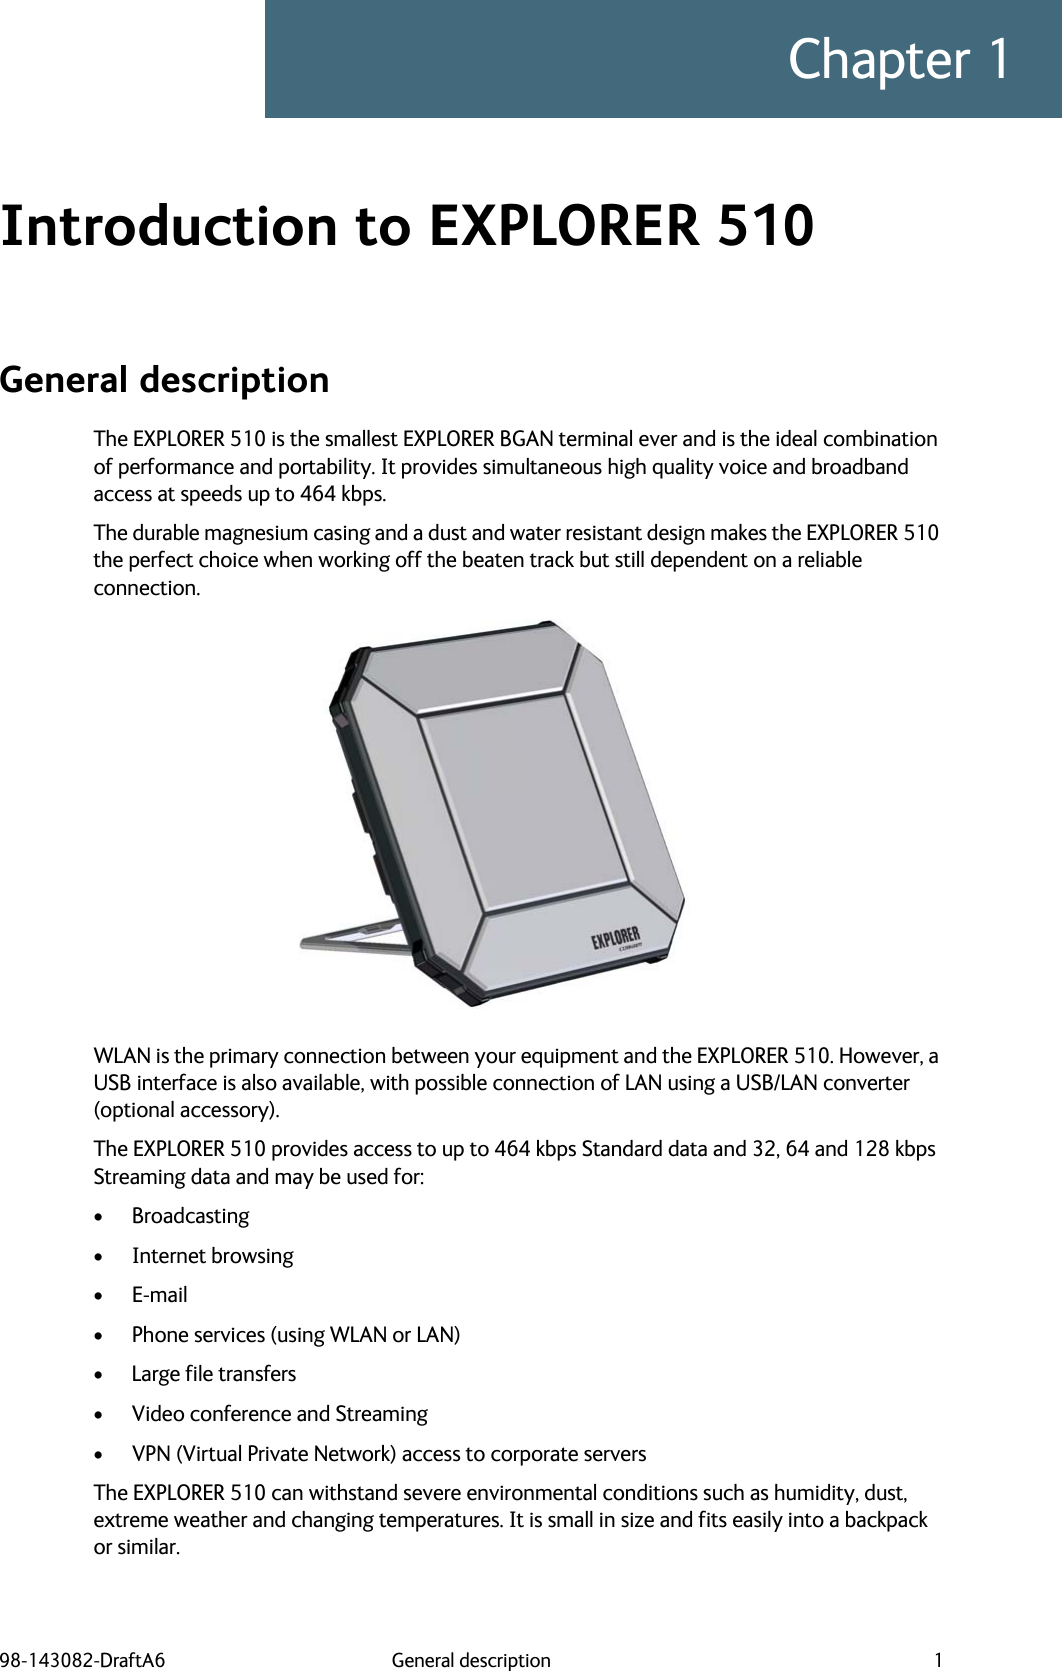 98-143082-DraftA6 General description 1Chapter 1Introduction to EXPLORER 510 1General descriptionThe EXPLORER 510 is the smallest EXPLORER BGAN terminal ever and is the ideal combination of performance and portability. It provides simultaneous high quality voice and broadband access at speeds up to 464 kbps.The durable magnesium casing and a dust and water resistant design makes the EXPLORER 510 the perfect choice when working off the beaten track but still dependent on a reliable connection. WLAN is the primary connection between your equipment and the EXPLORER 510. However, a USB interface is also available, with possible connection of LAN using a USB/LAN converter (optional accessory).The EXPLORER 510 provides access to up to 464 kbps Standard data and 32, 64 and 128 kbps Streaming data and may be used for:• Broadcasting• Internet browsing•E-mail• Phone services (using WLAN or LAN)• Large file transfers• Video conference and Streaming• VPN (Virtual Private Network) access to corporate serversThe EXPLORER 510 can withstand severe environmental conditions such as humidity, dust, extreme weather and changing temperatures. It is small in size and fits easily into a backpack or similar.